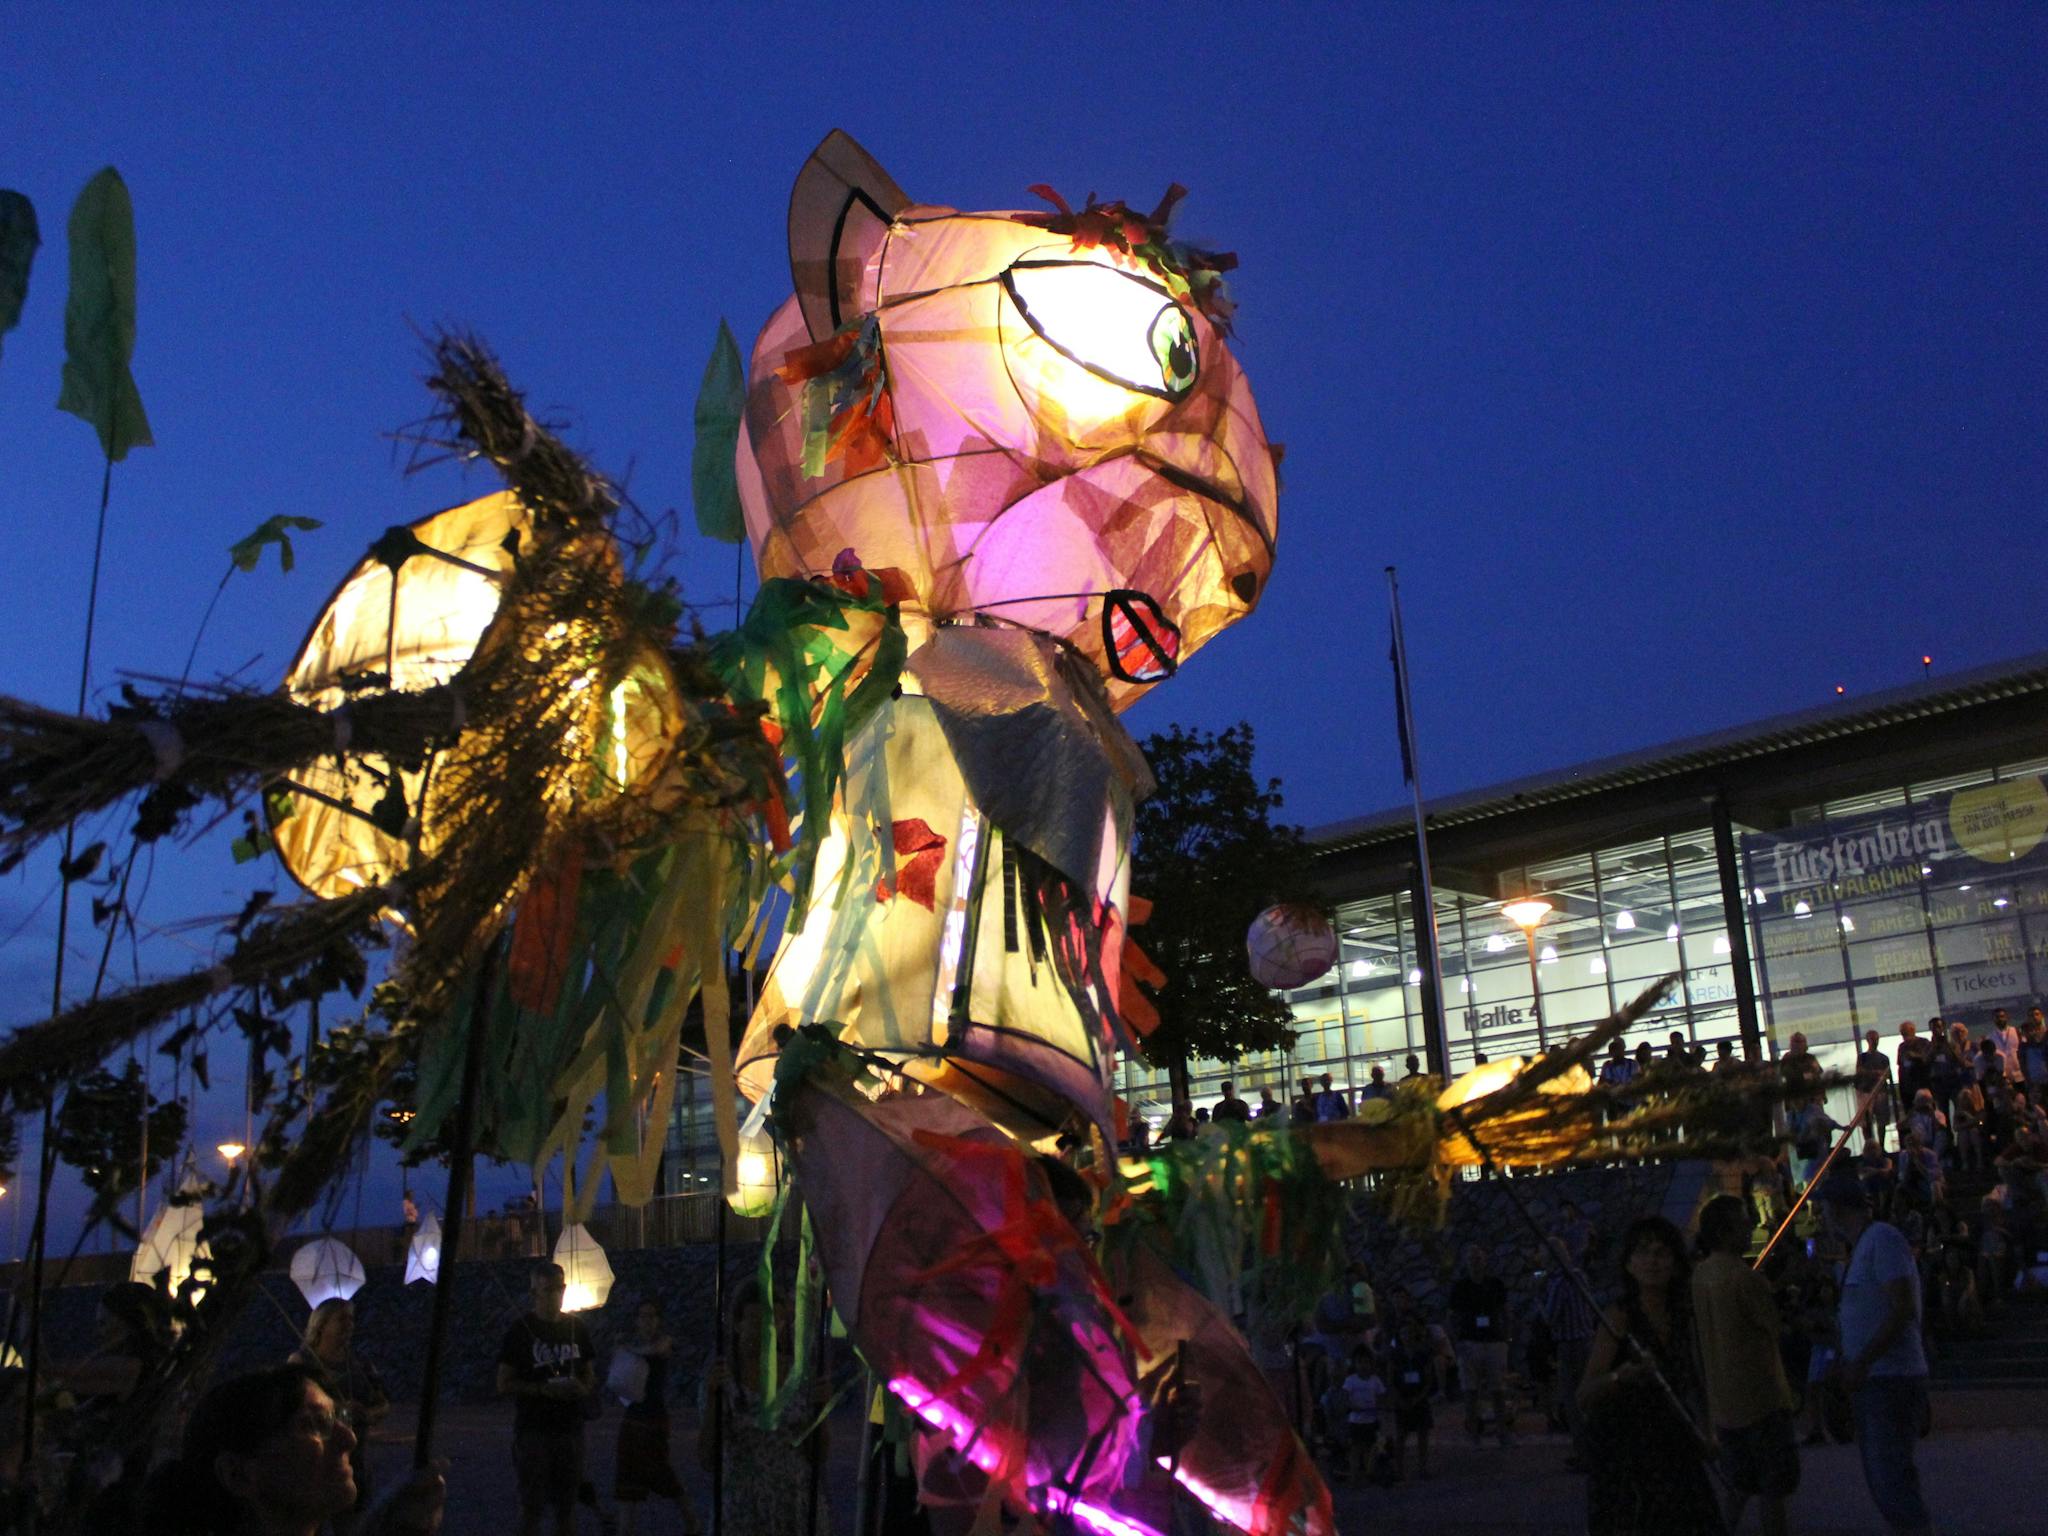 A giant illuminated puppet walks down a street crowded with people